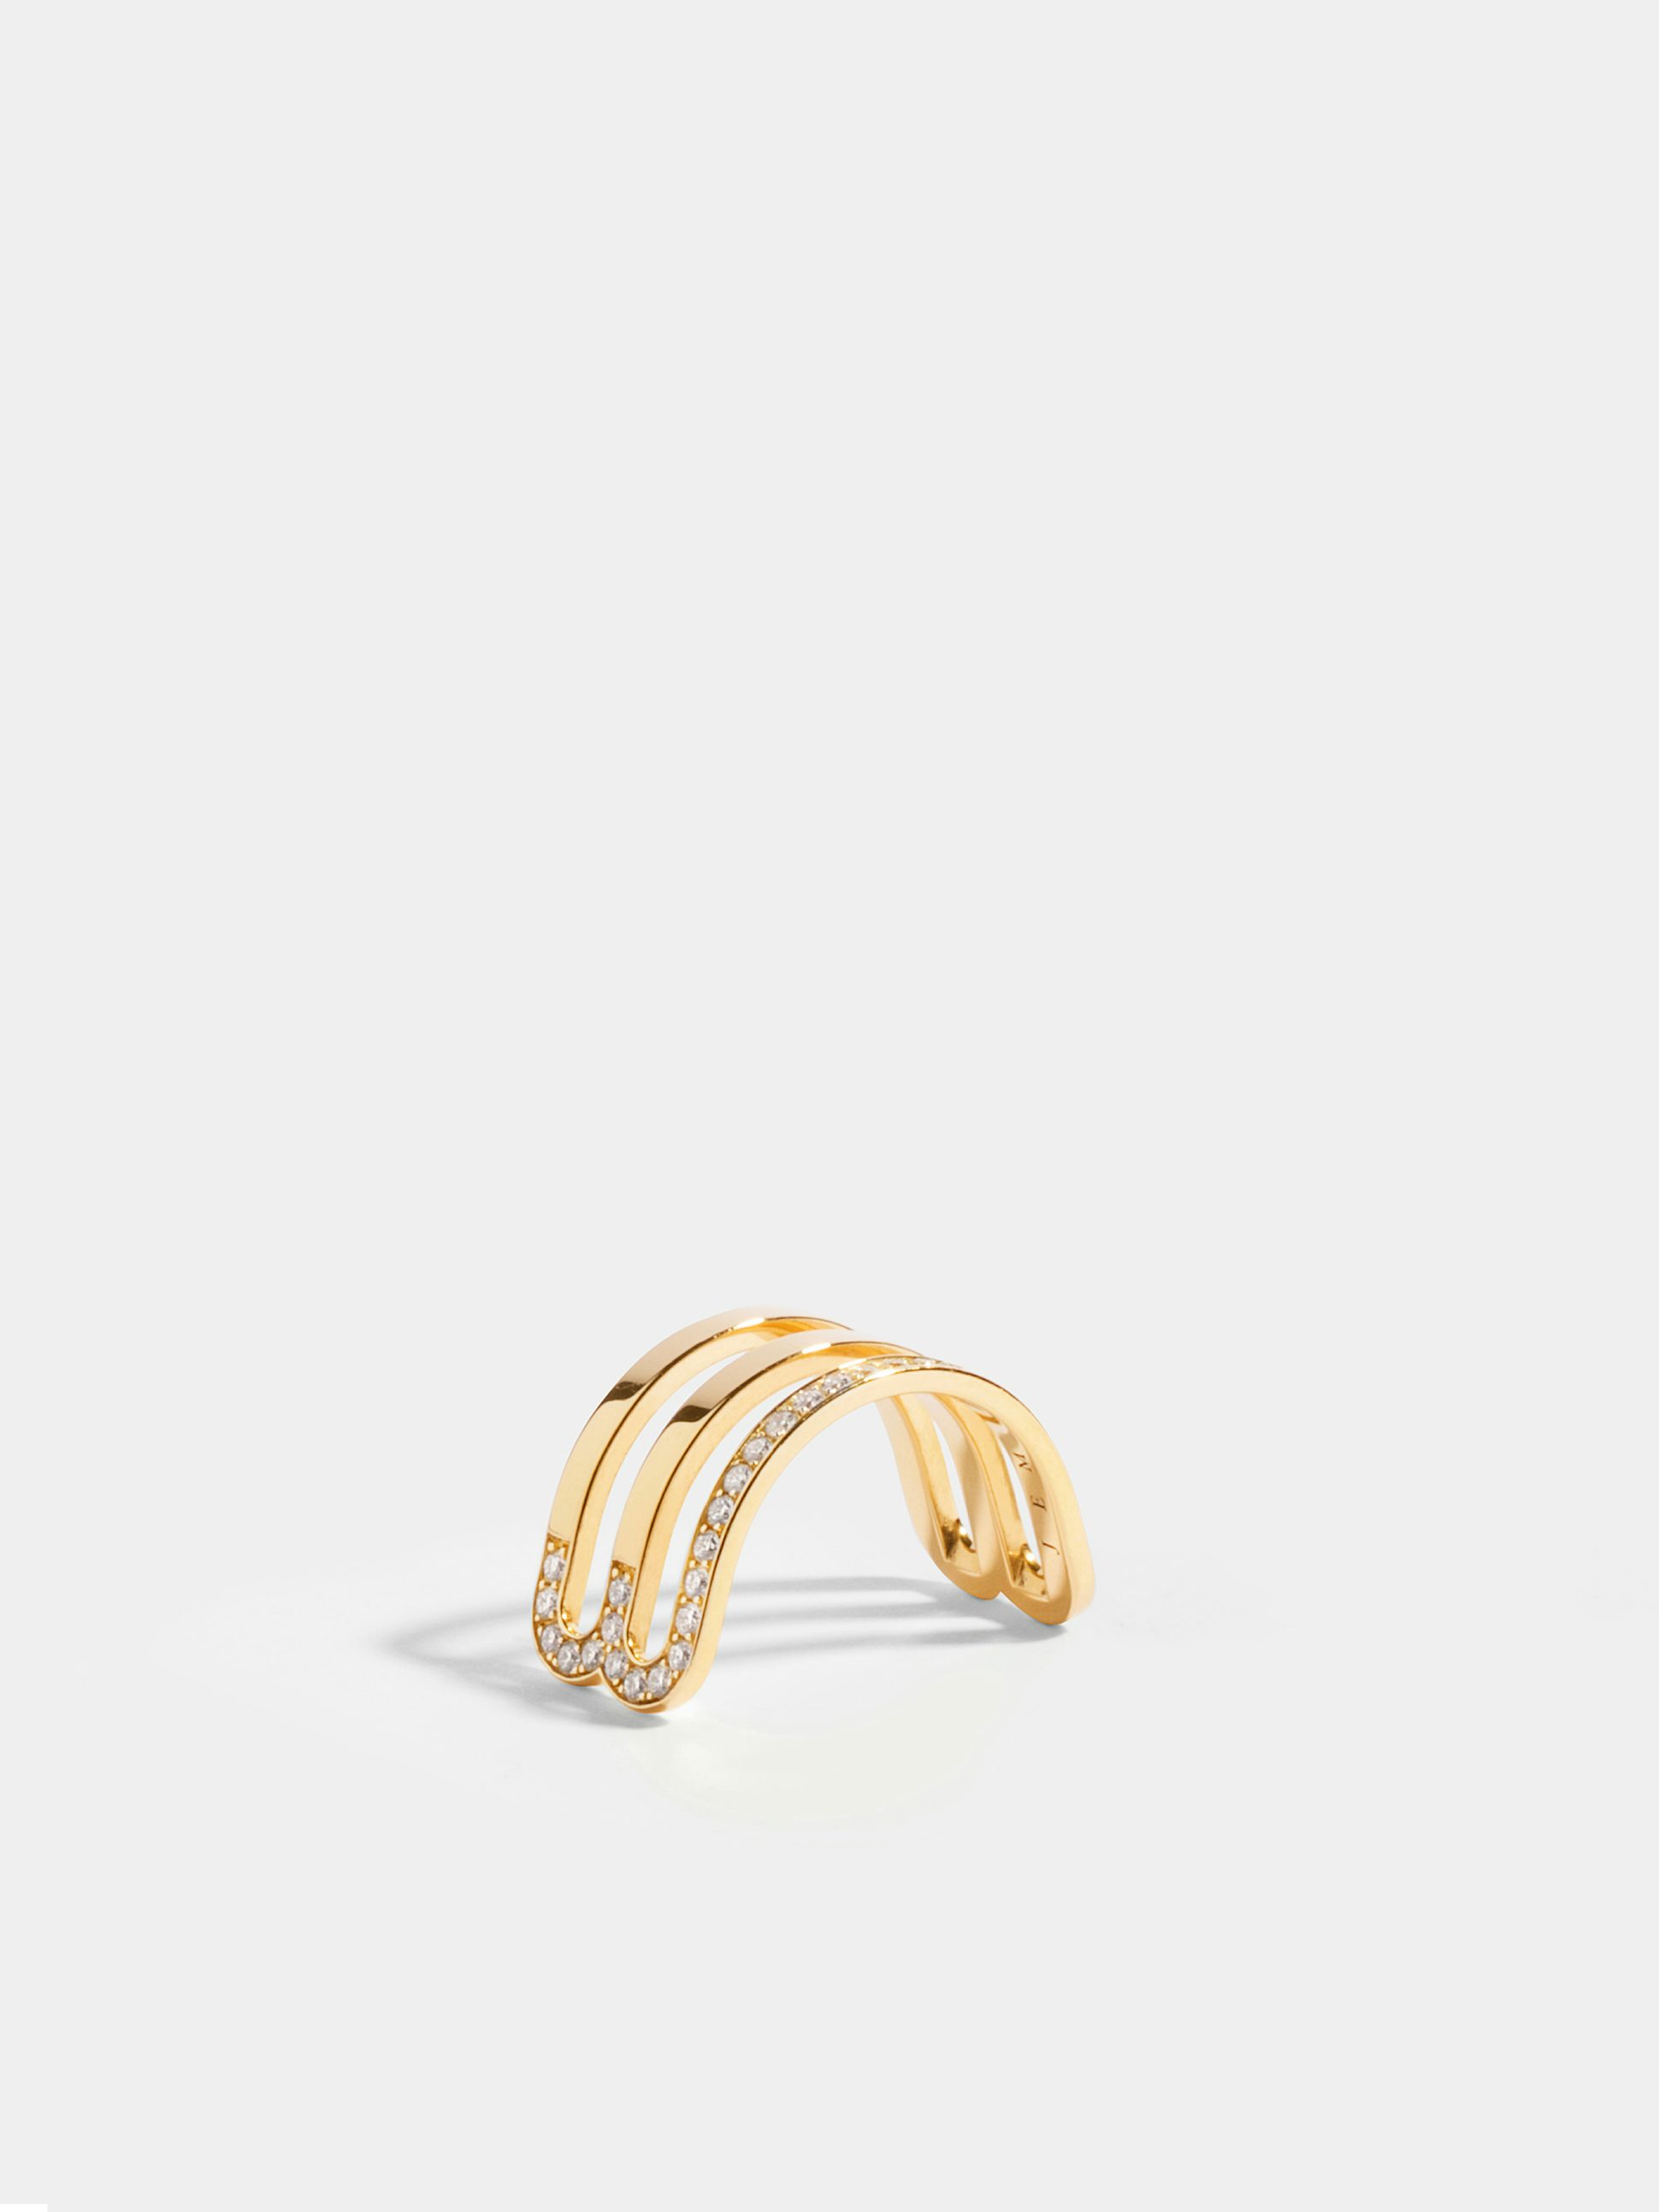 Étreintes double half-ring in 18k Fairmined ethical yellow gold, paved with lab-grown diamonds on one line.